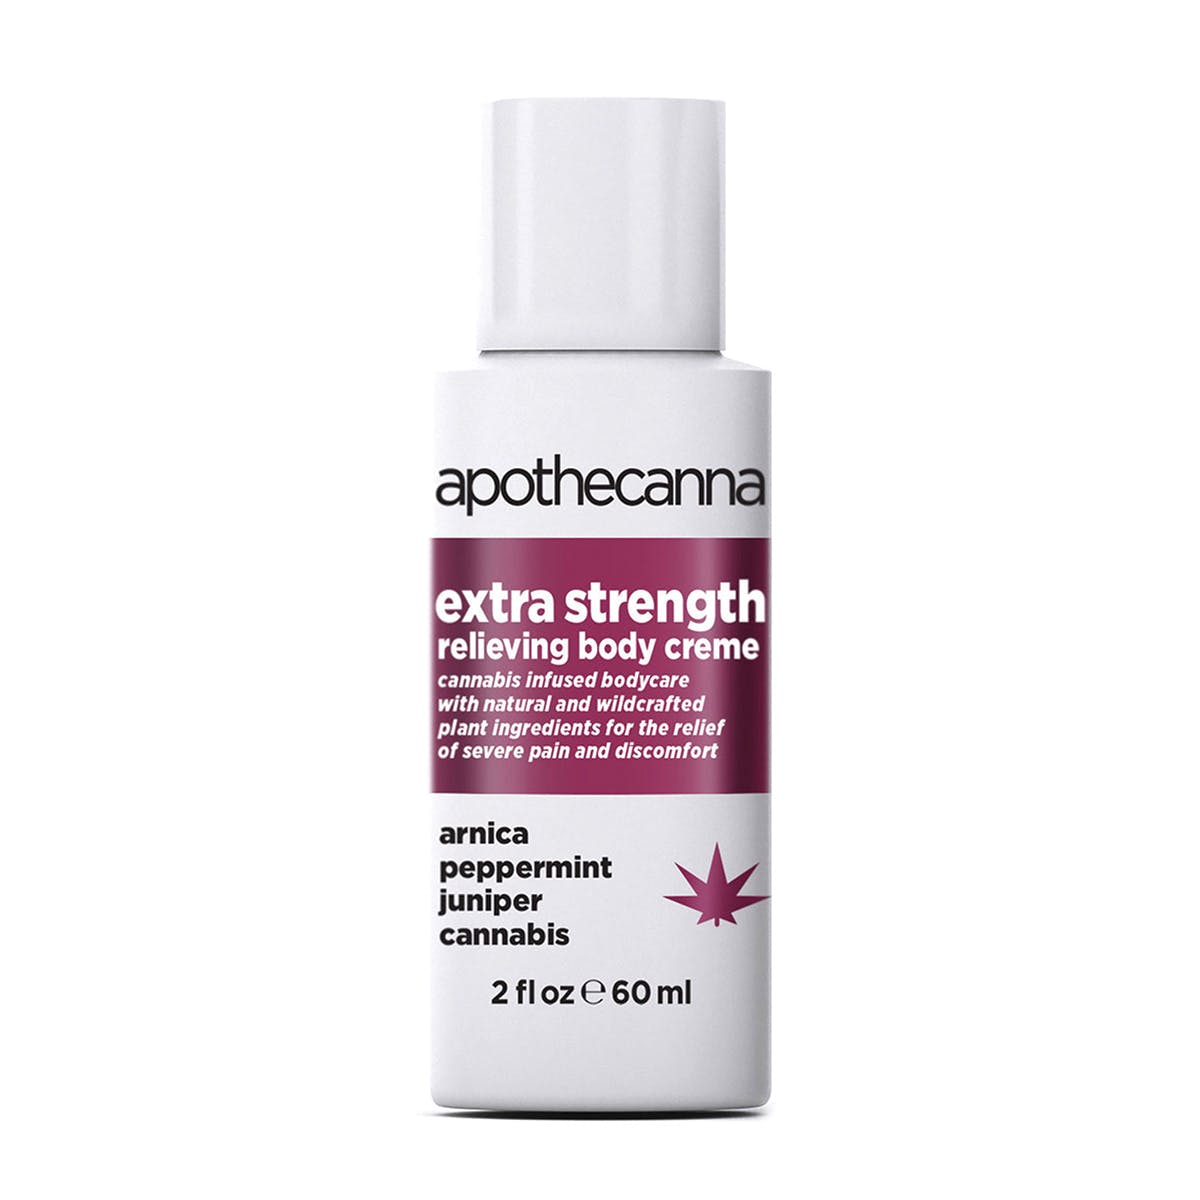 marijuana-dispensaries-the-herbal-connection-or-in-eugene-extra-strength-relieving-creme-2c-2-oz